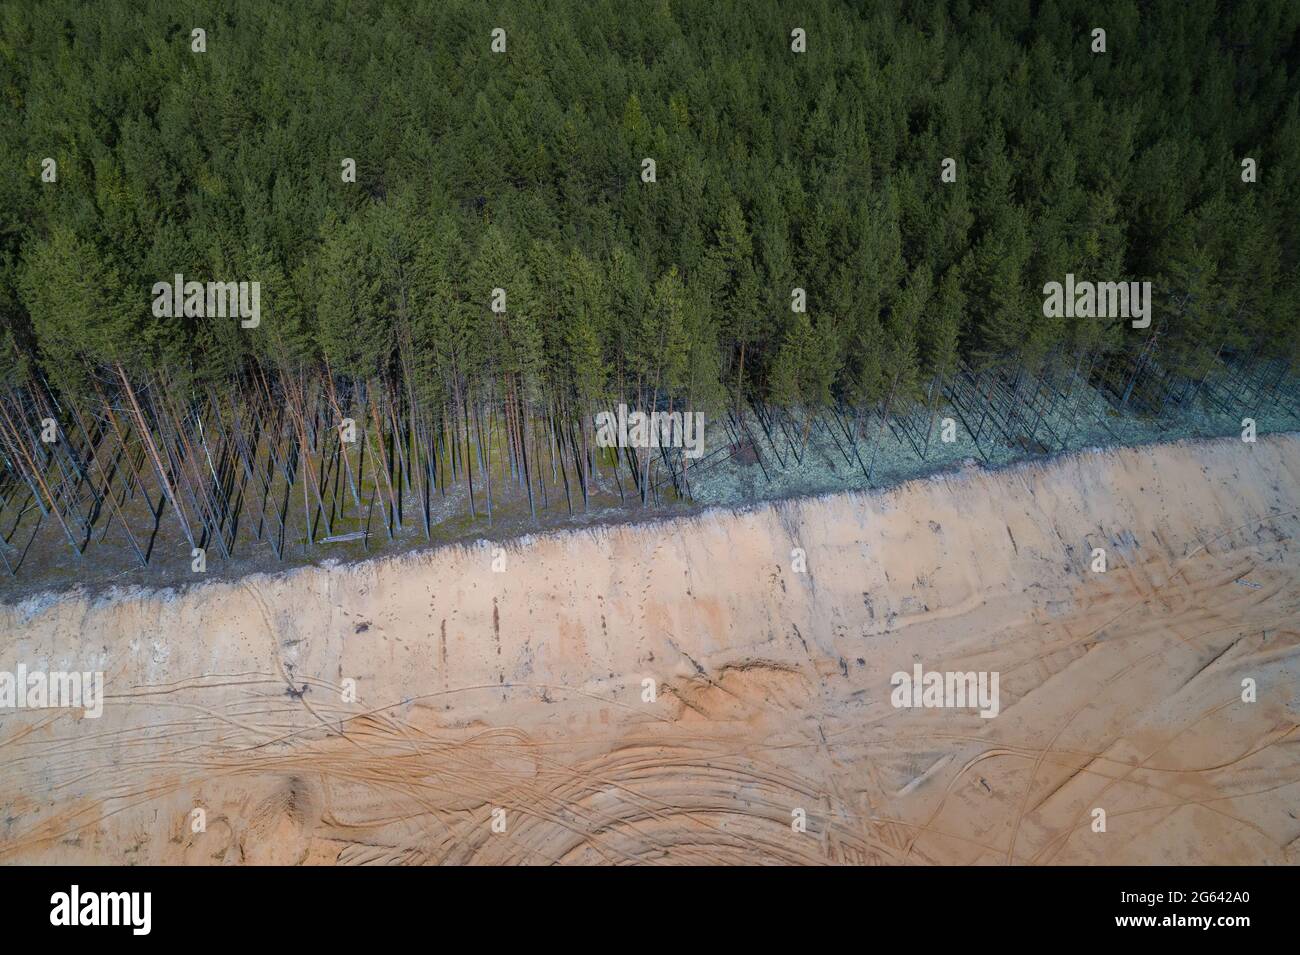 Above the border of a quarry advancing on the forest Stock Photo